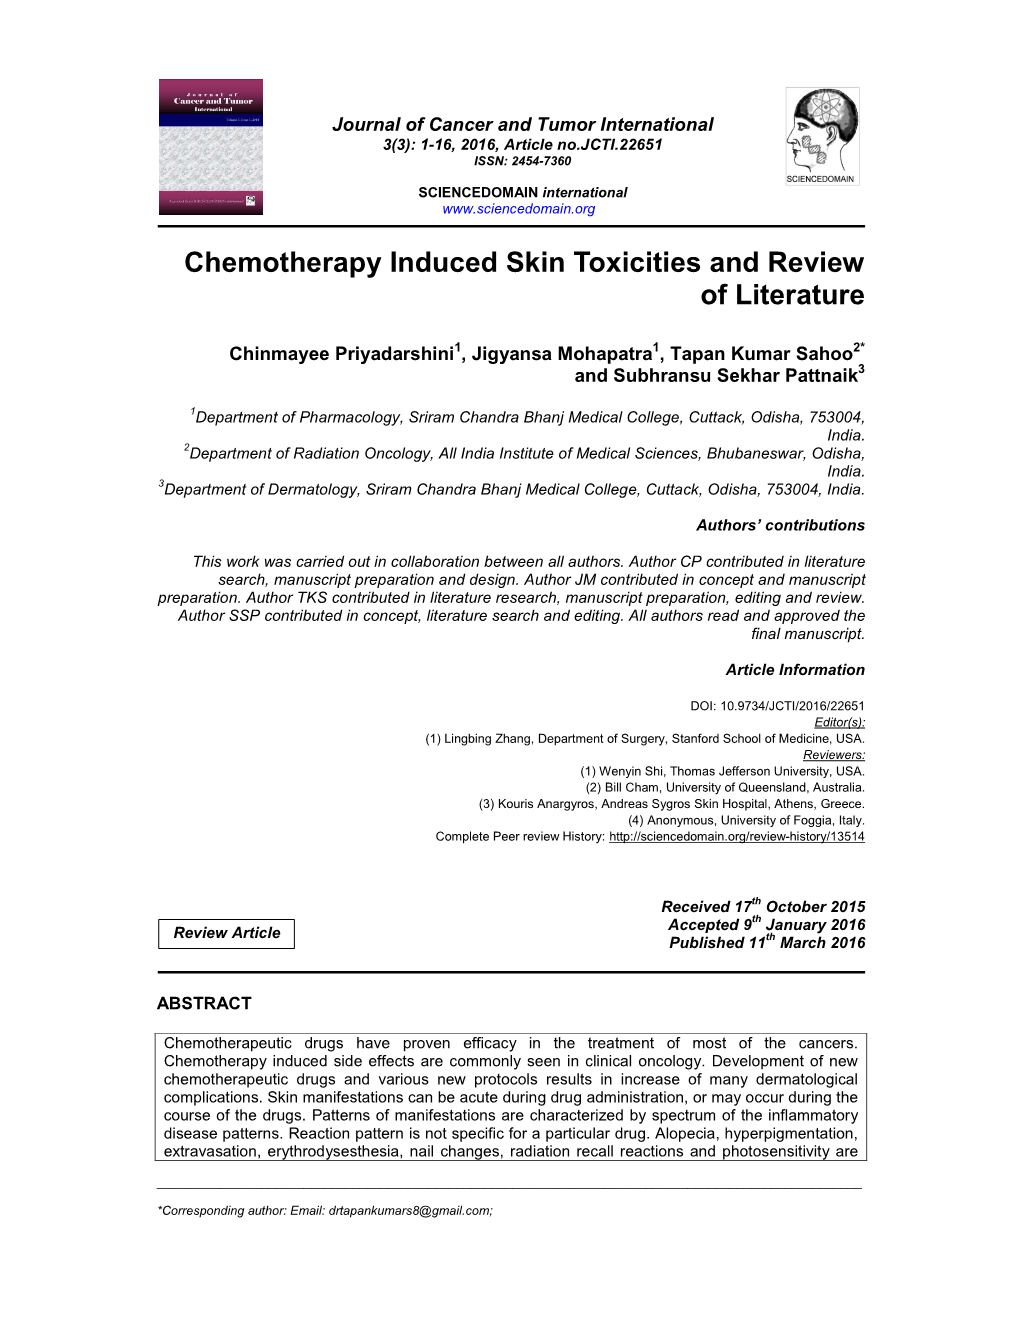 Chemotherapy Induced Skin Toxicities and Review of Literature